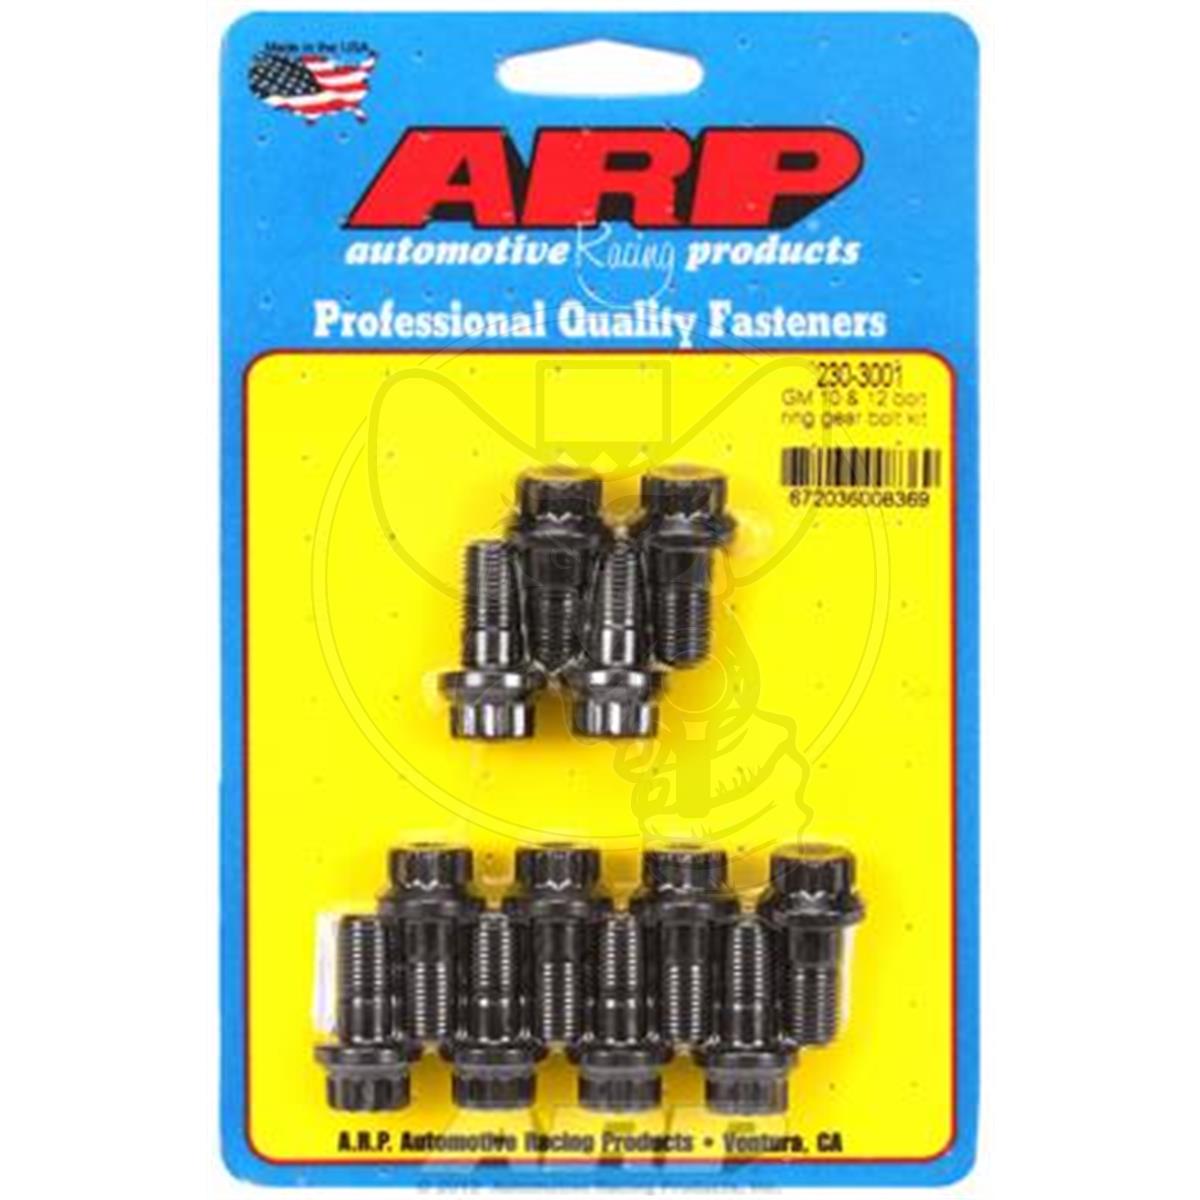 ARP DIFFERENTIAL CROWN WHEEL BOLTS FITS GM 10 & 12 BOLT DIFF